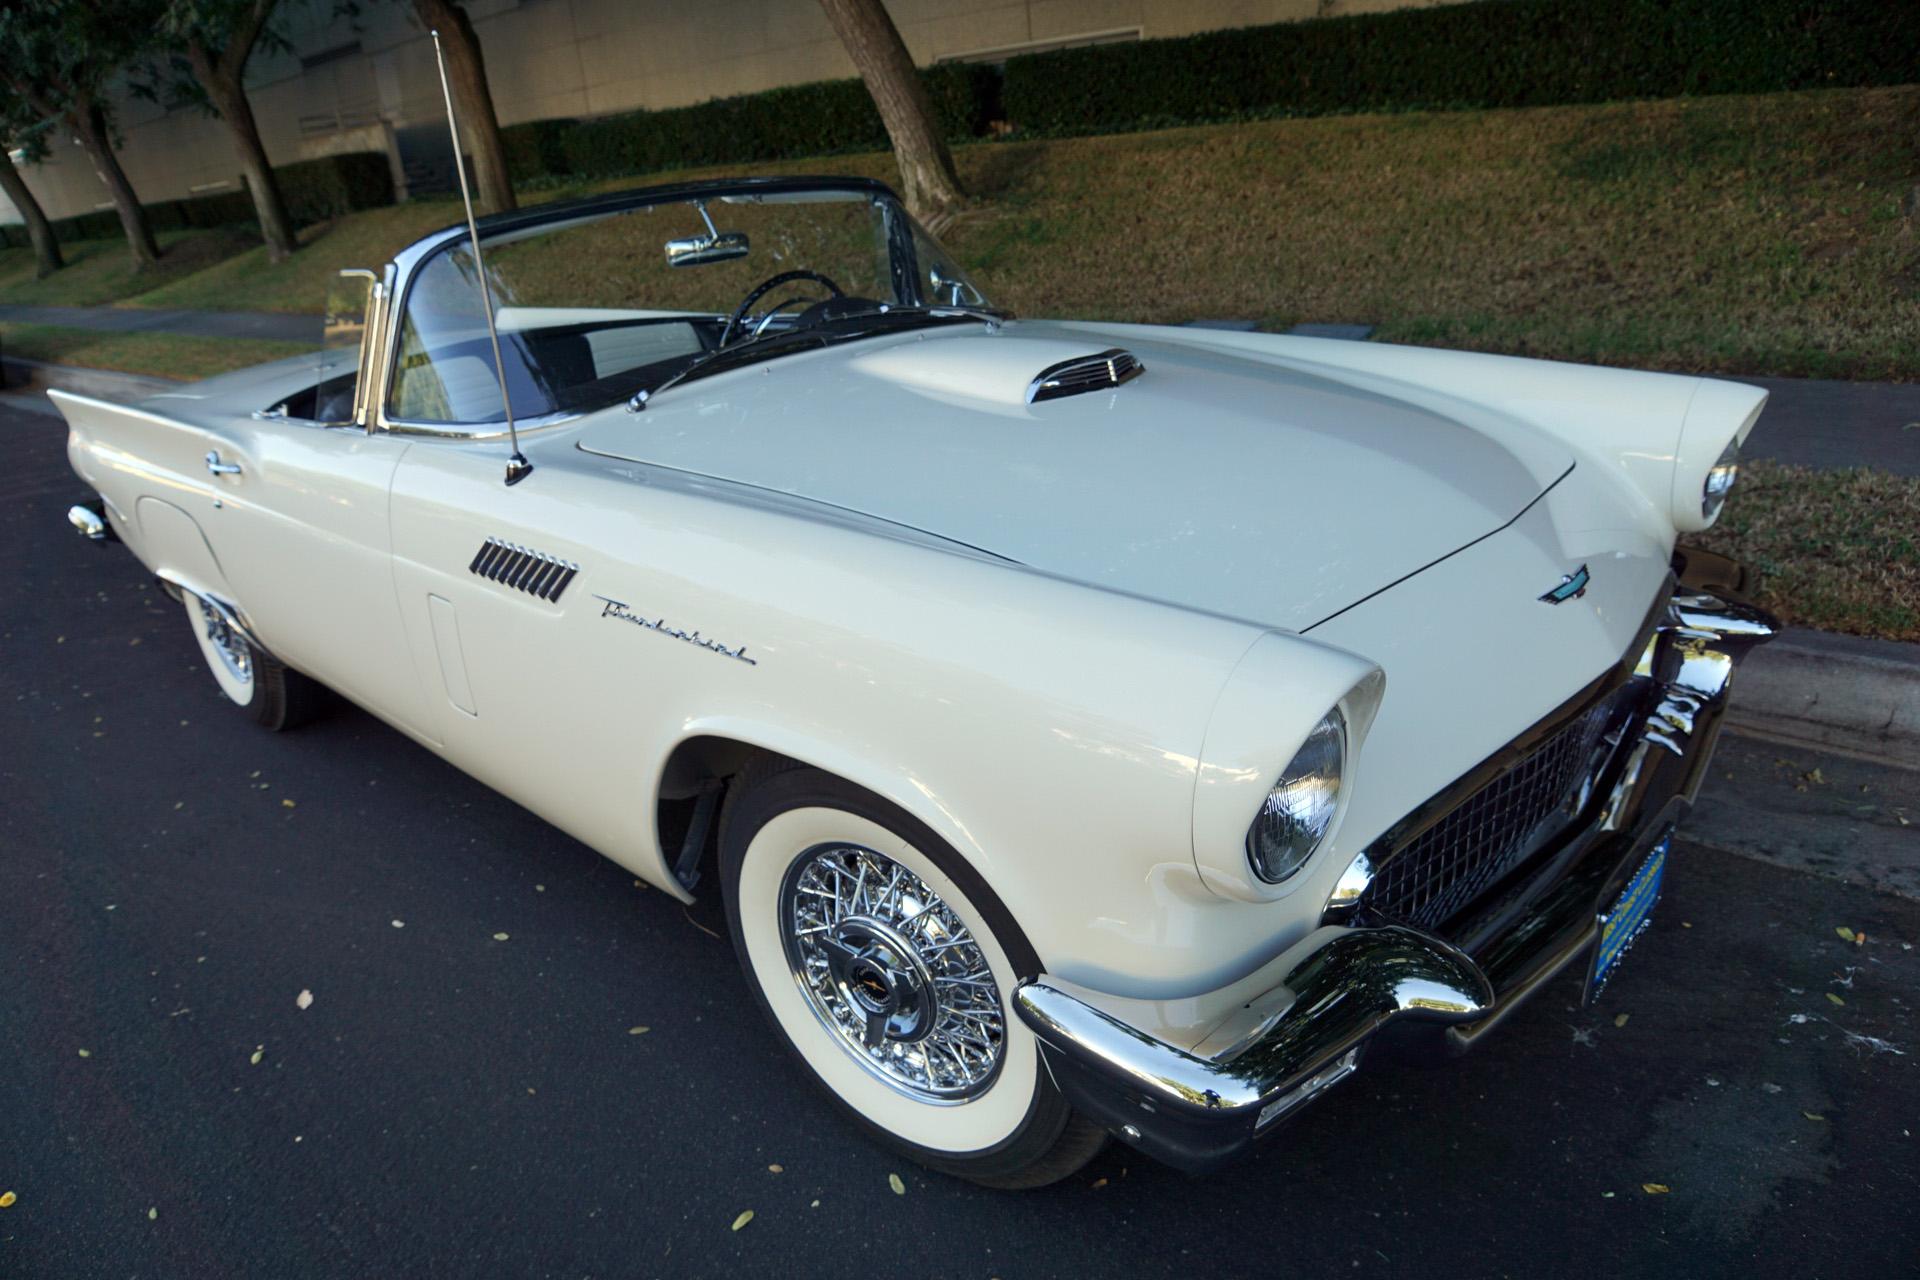 Supercharged 1957 Ford Thunderbird-F-Code Front Passenger Photo